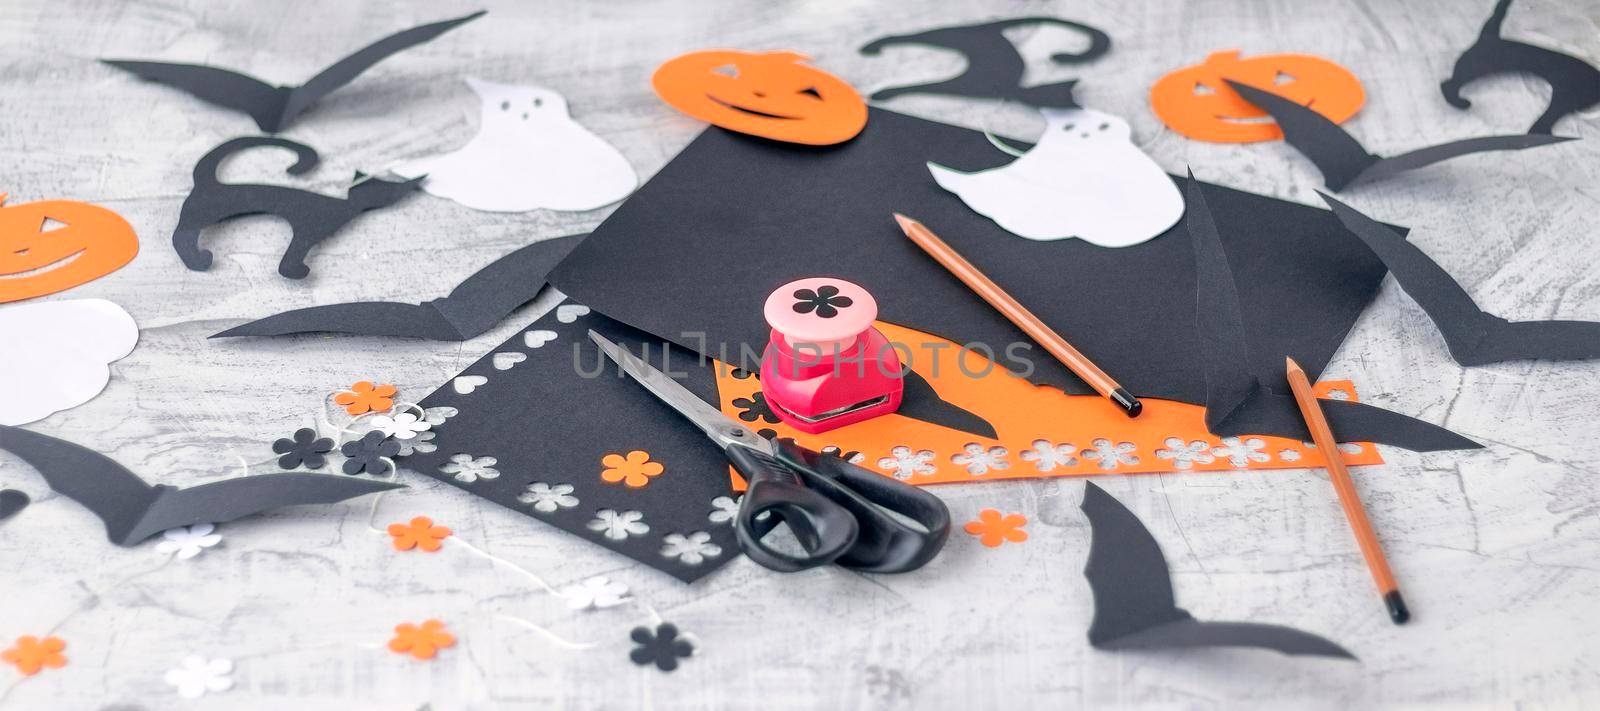 banner with Preparation for Halloween Decoration for the holidays, cutting from colored paper on a white brick wall. orange and black colored paper, scissors, pencils, figured hole punch Soft focus.